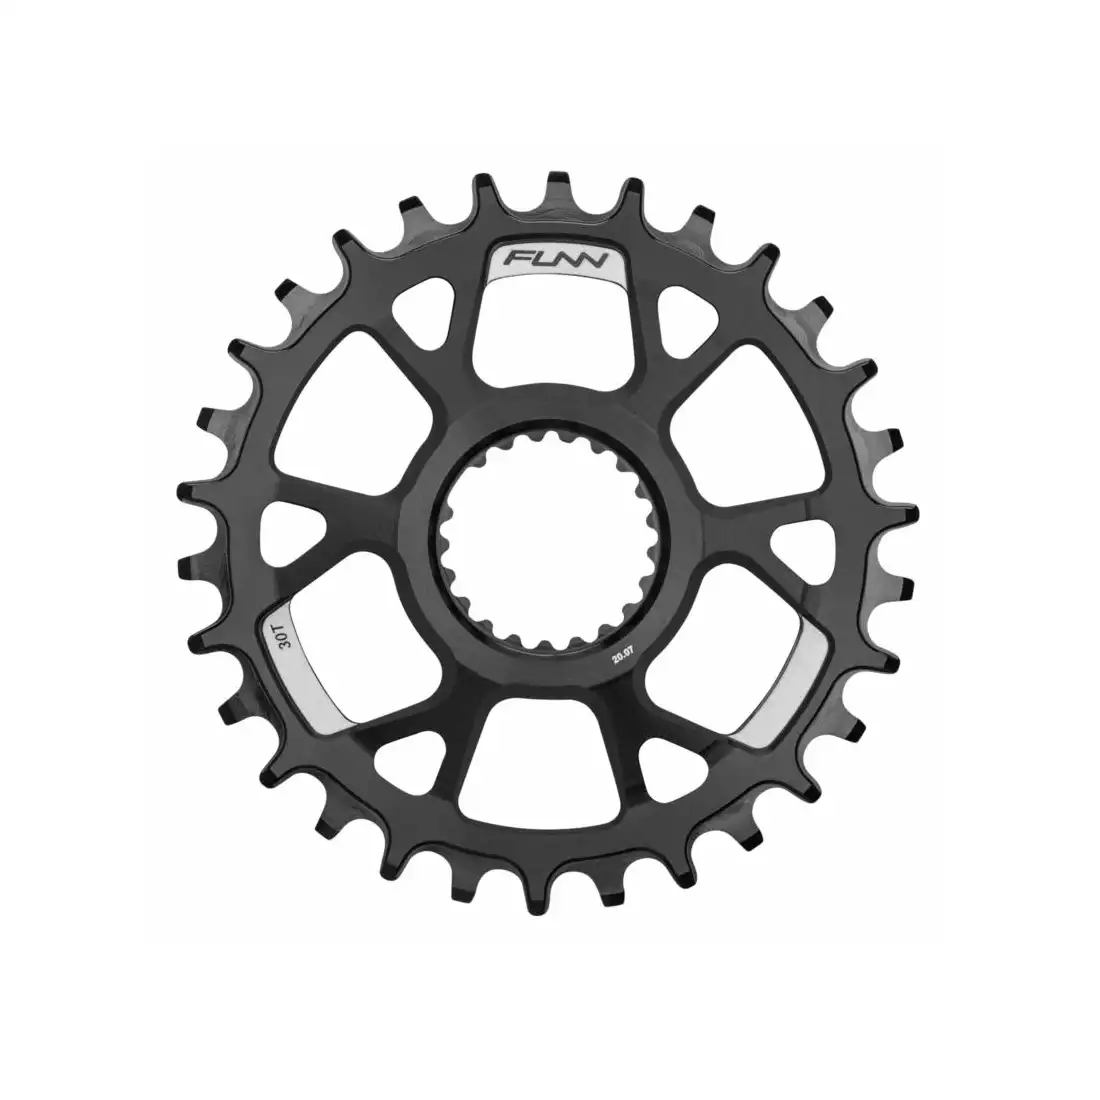 FUNN SOLO DS NARROW-WIDE 32T sprocket for bicycle crank czarna